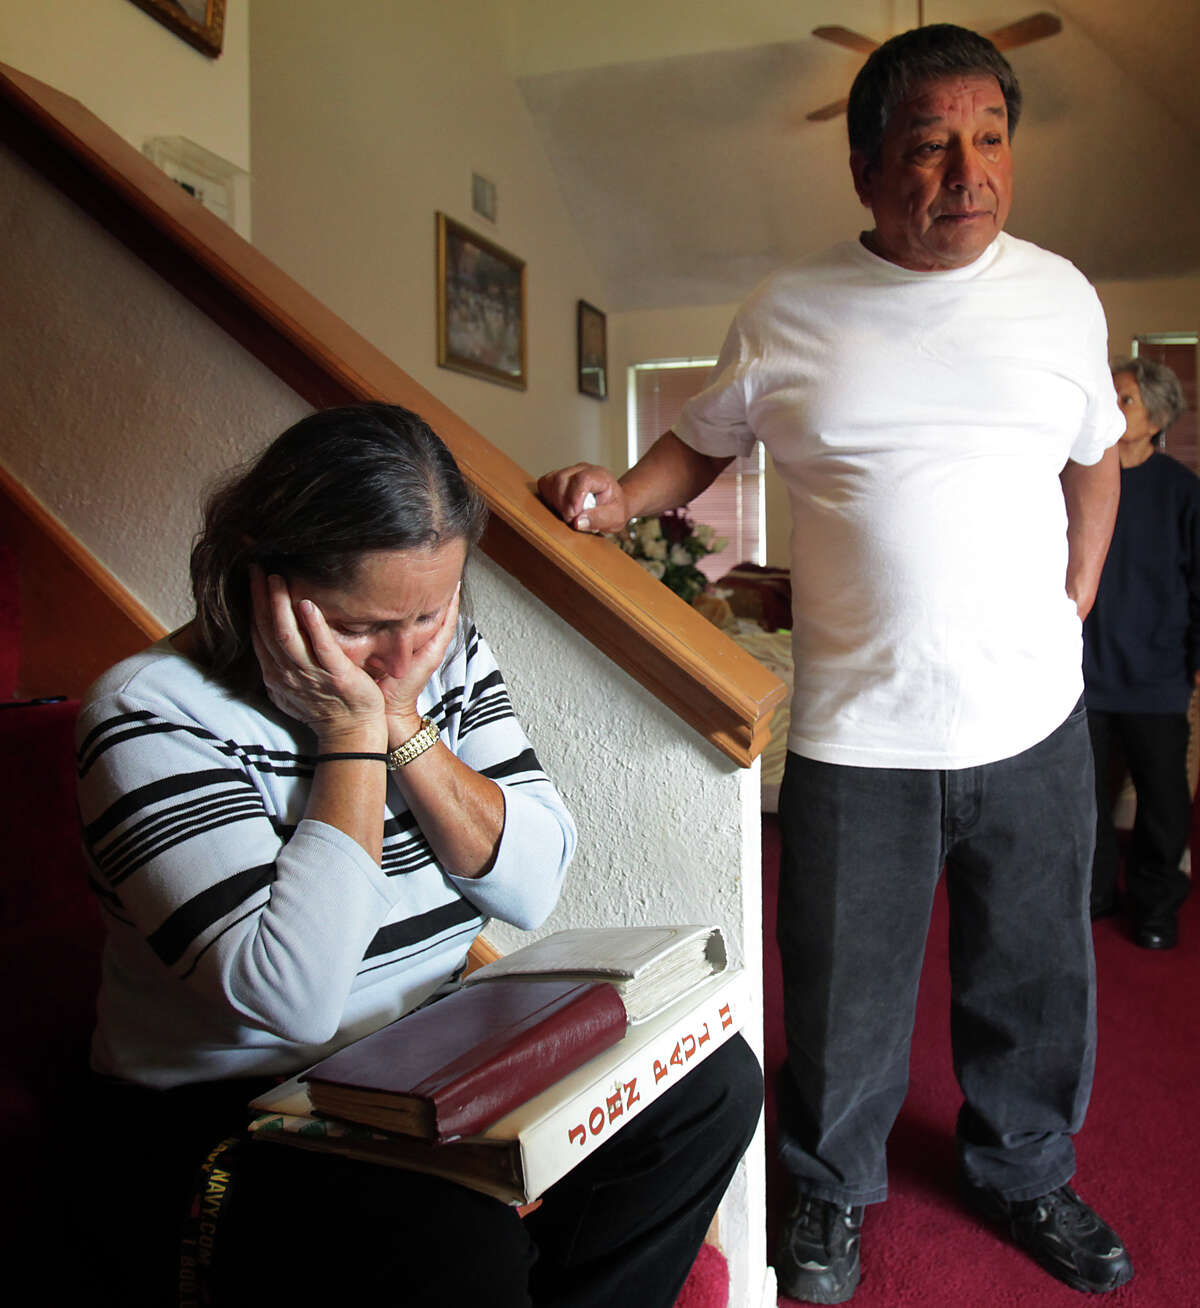 Maria Beltran, left, grieves for her son Jose Beltran, 31, and her grandson Eli Beltran, 3, who were killed after they were hit by a car, walking along Foster Rd. near I-10. Ricardo Espinoza, Jose's step father, is at right. Friday, Nov. 30, 2012.